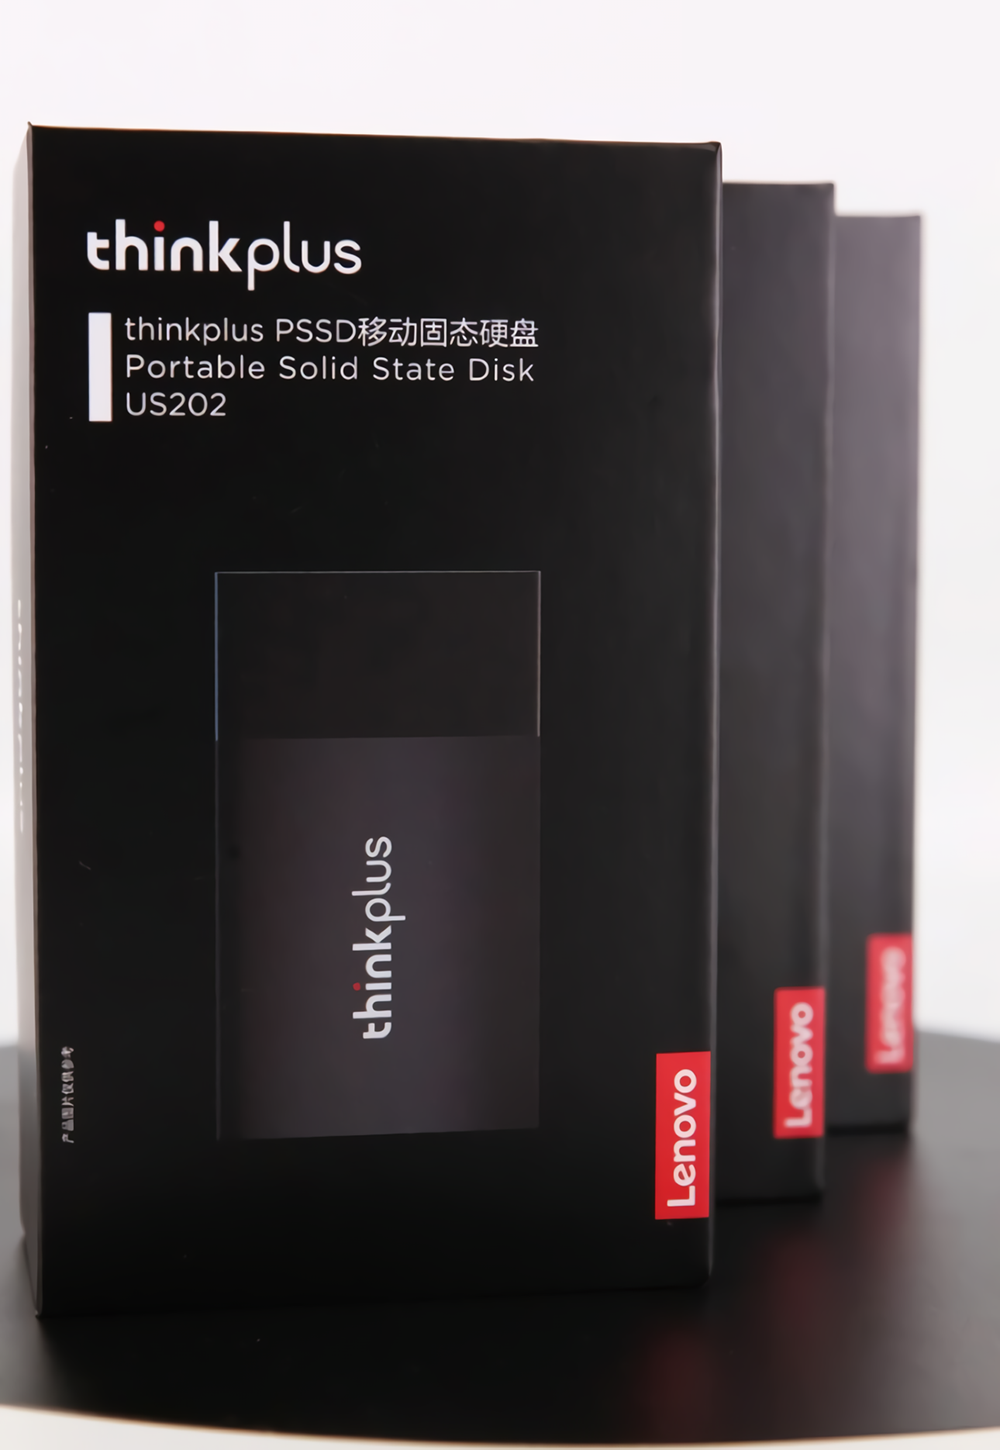 Lenovo-Thinkplus-Type-C31-PSSD-Mobile-Solid-State-Drive-Storage-Disk-512G-1TB-Hard-Drive-US202-1935569-6